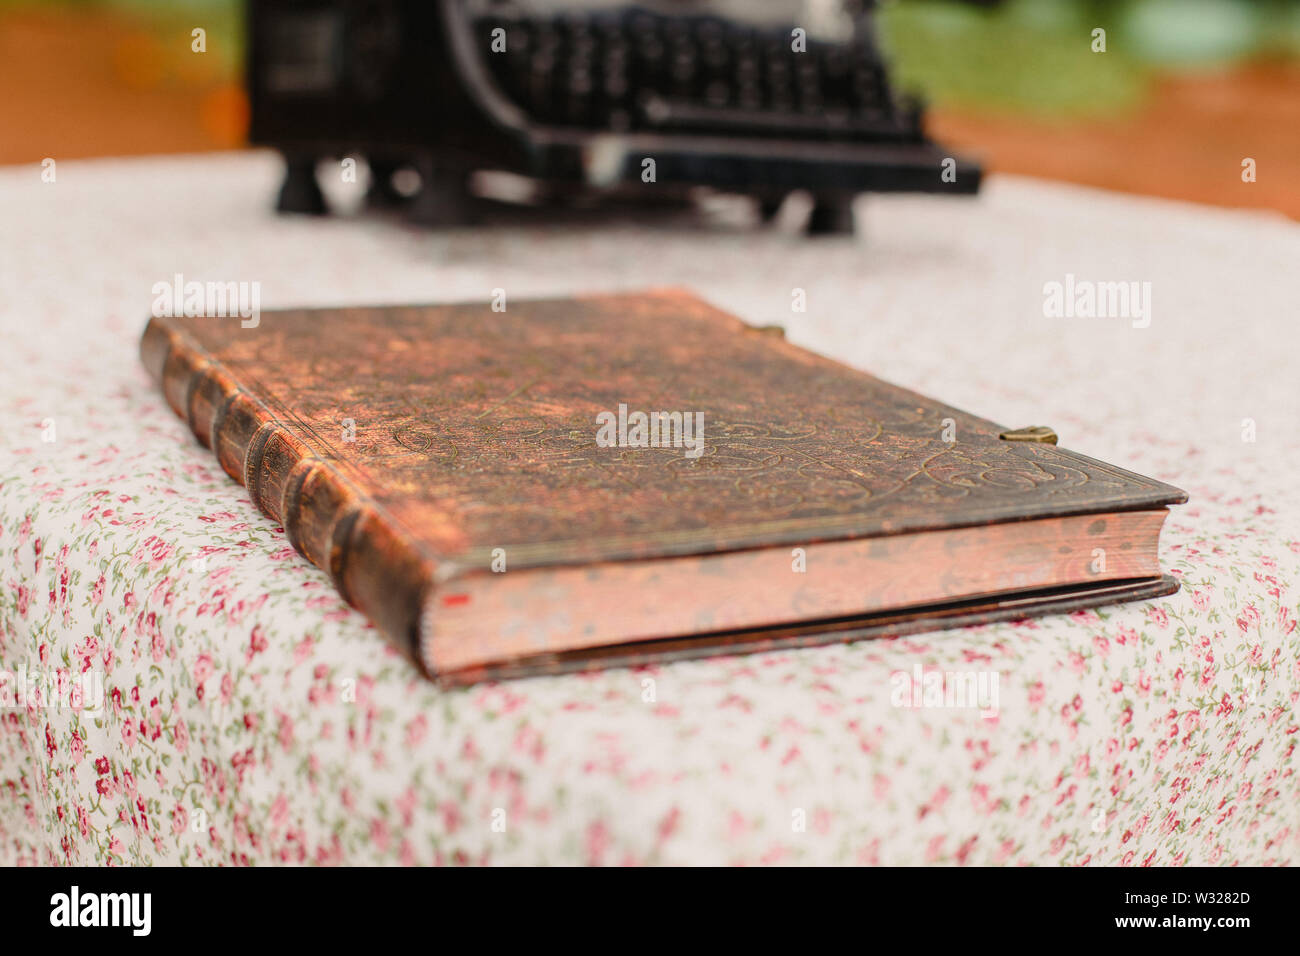 Old book with leather covers on a vintage style table. Stock Photo